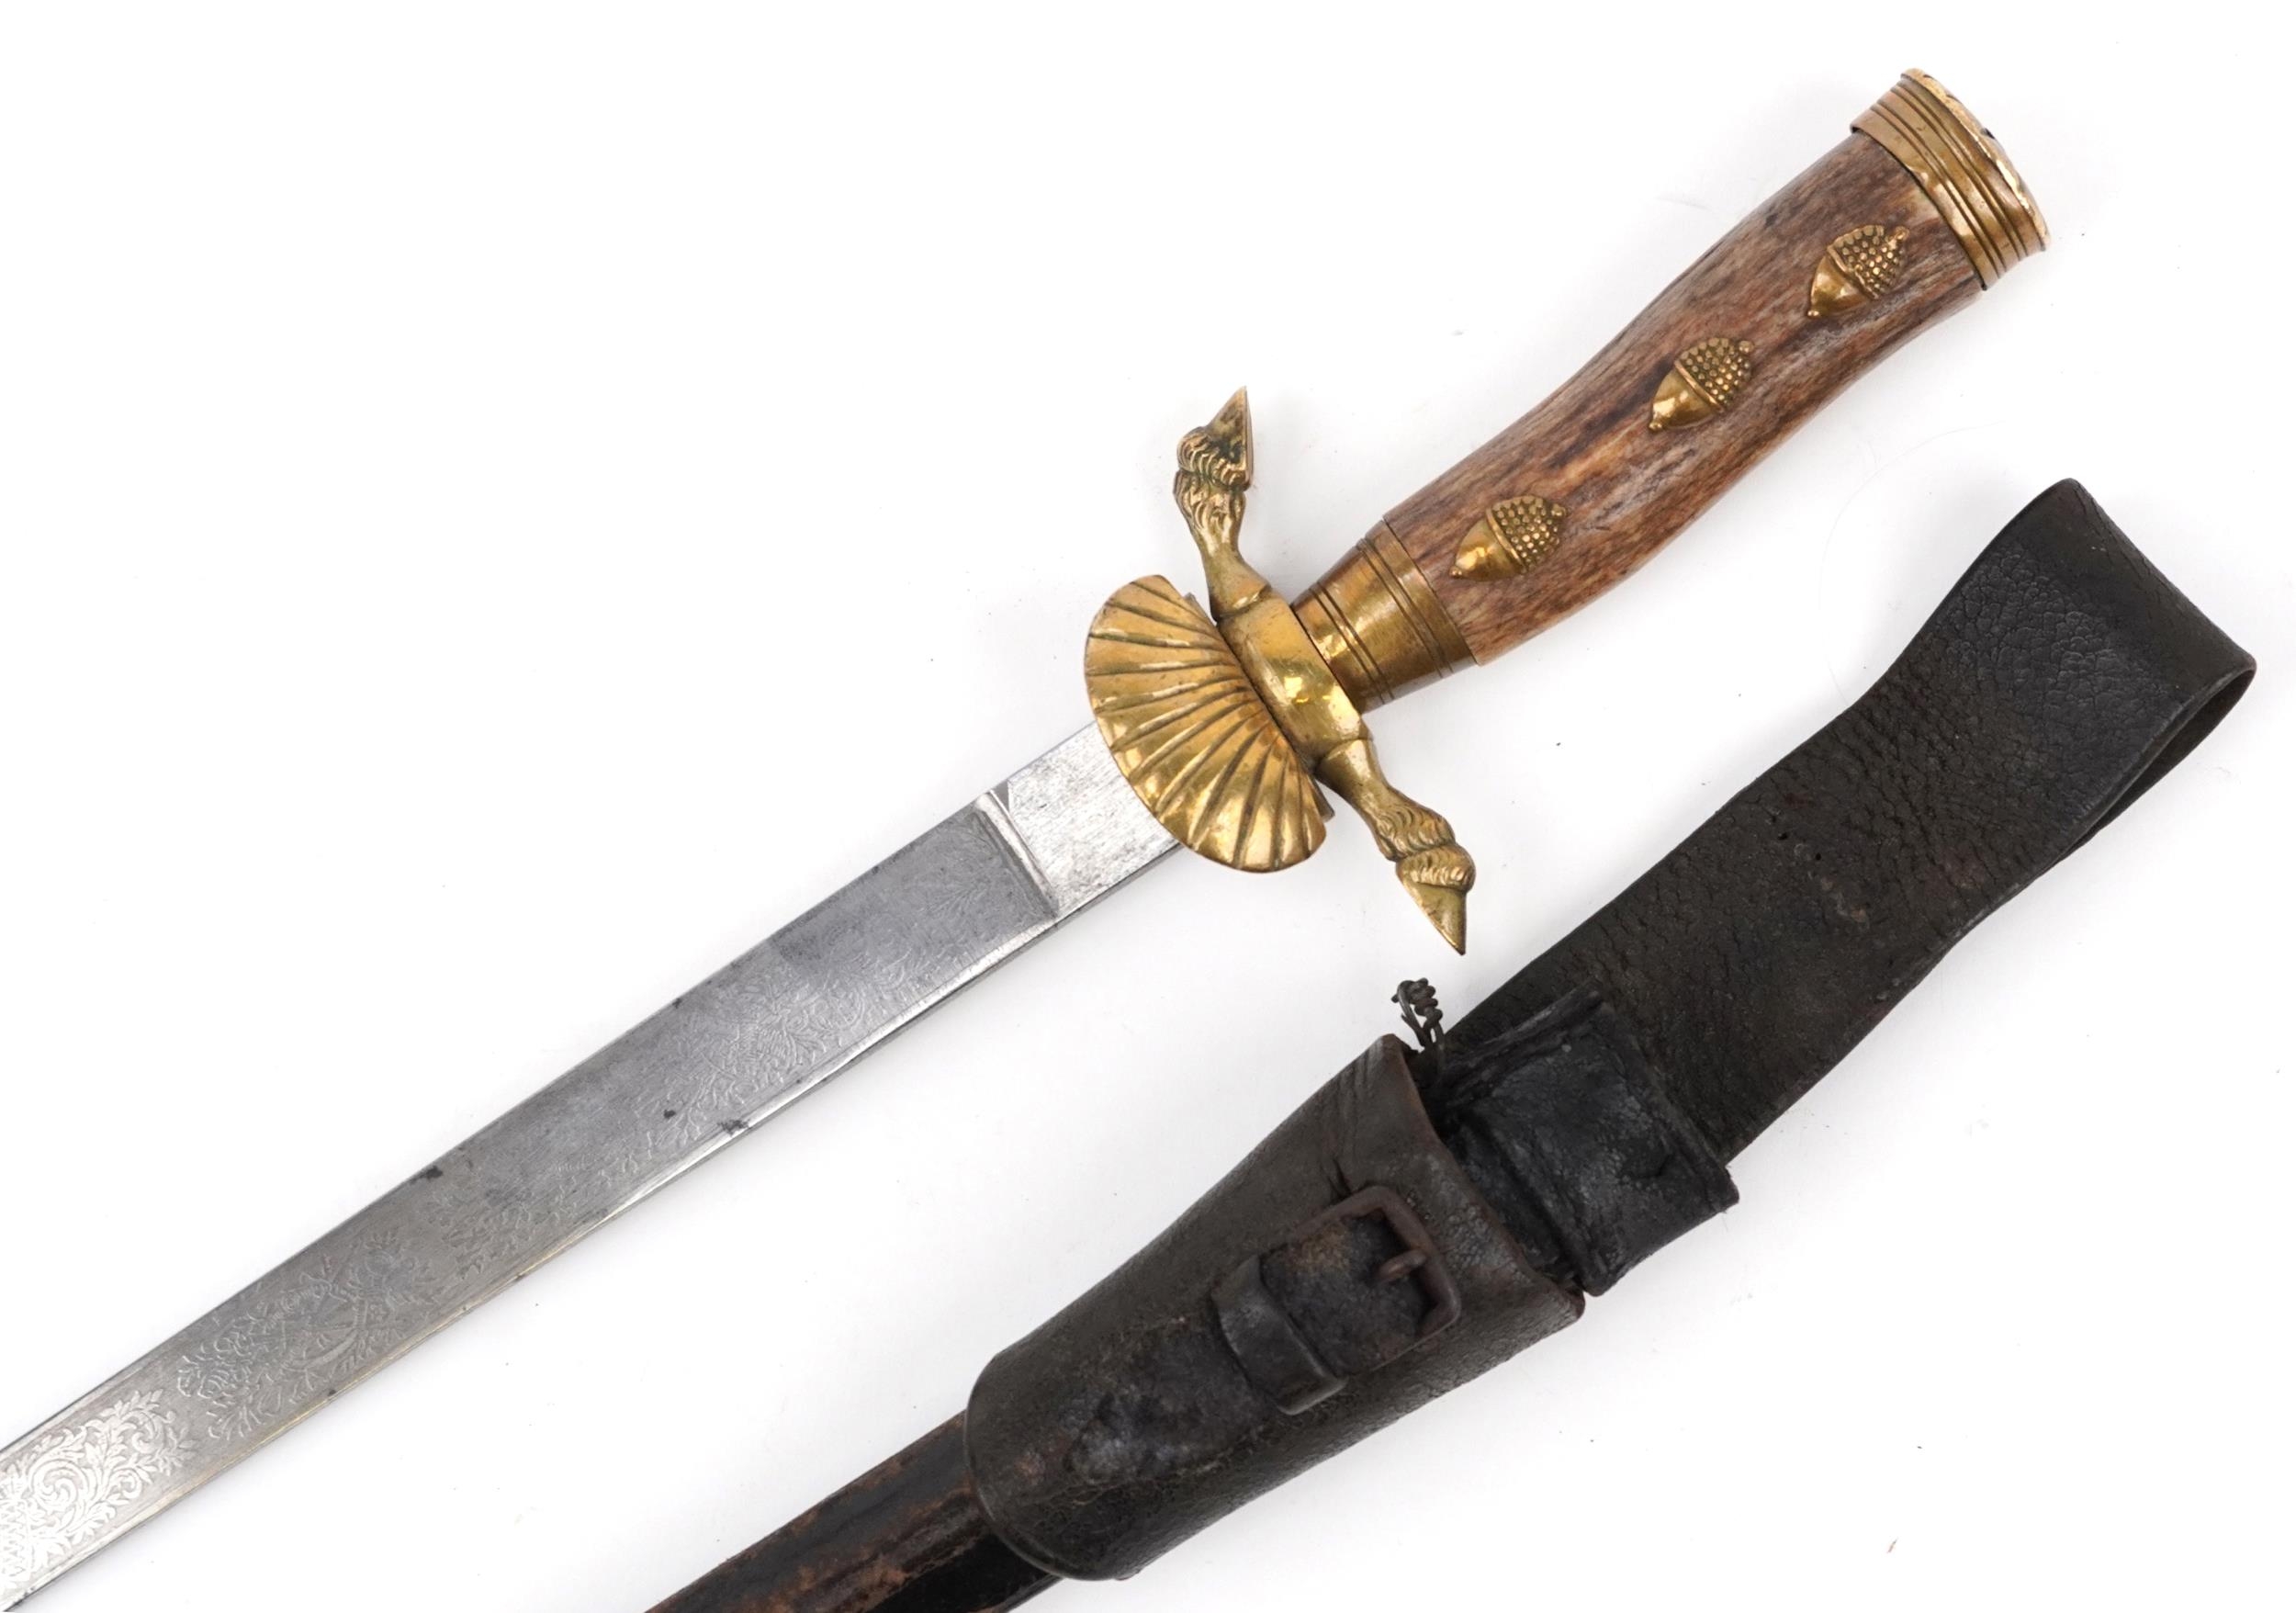 German military interest hunting knife with leather scabbard, staghorn handle and steel blade having